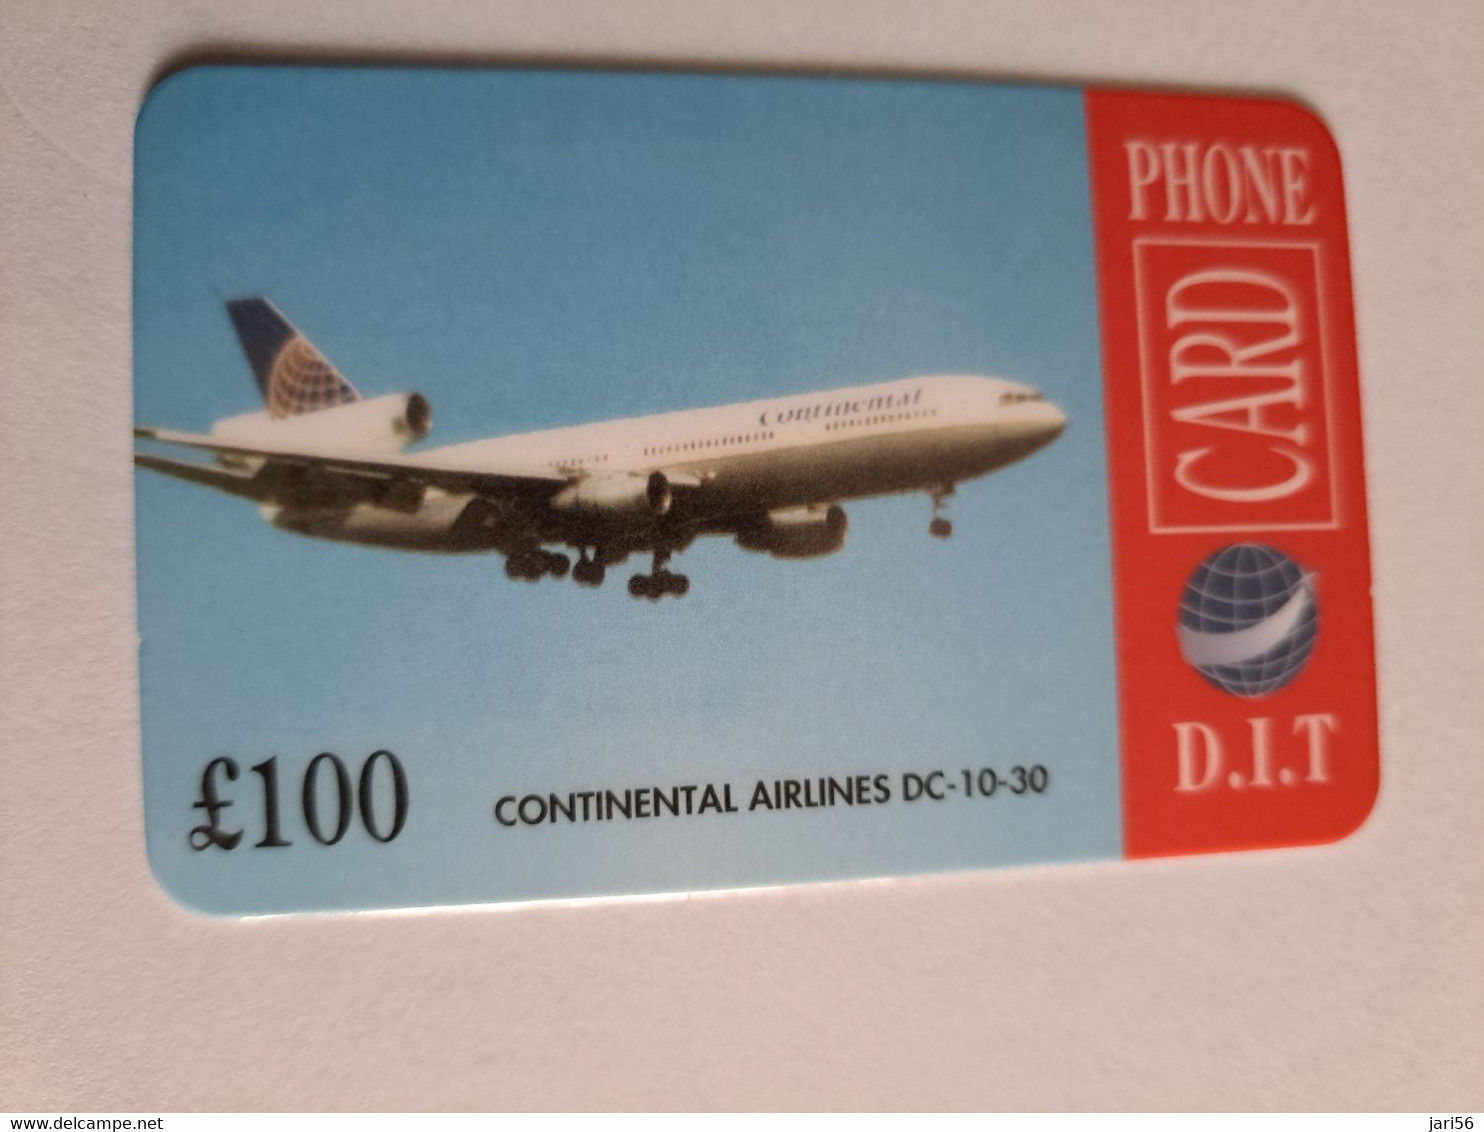 GREAT BRITAIN   100 POUND   / CONTINENTAL AIRLINES DC 10-30   DIT PHONECARD    PREPAID CARD      **12903** - Collezioni